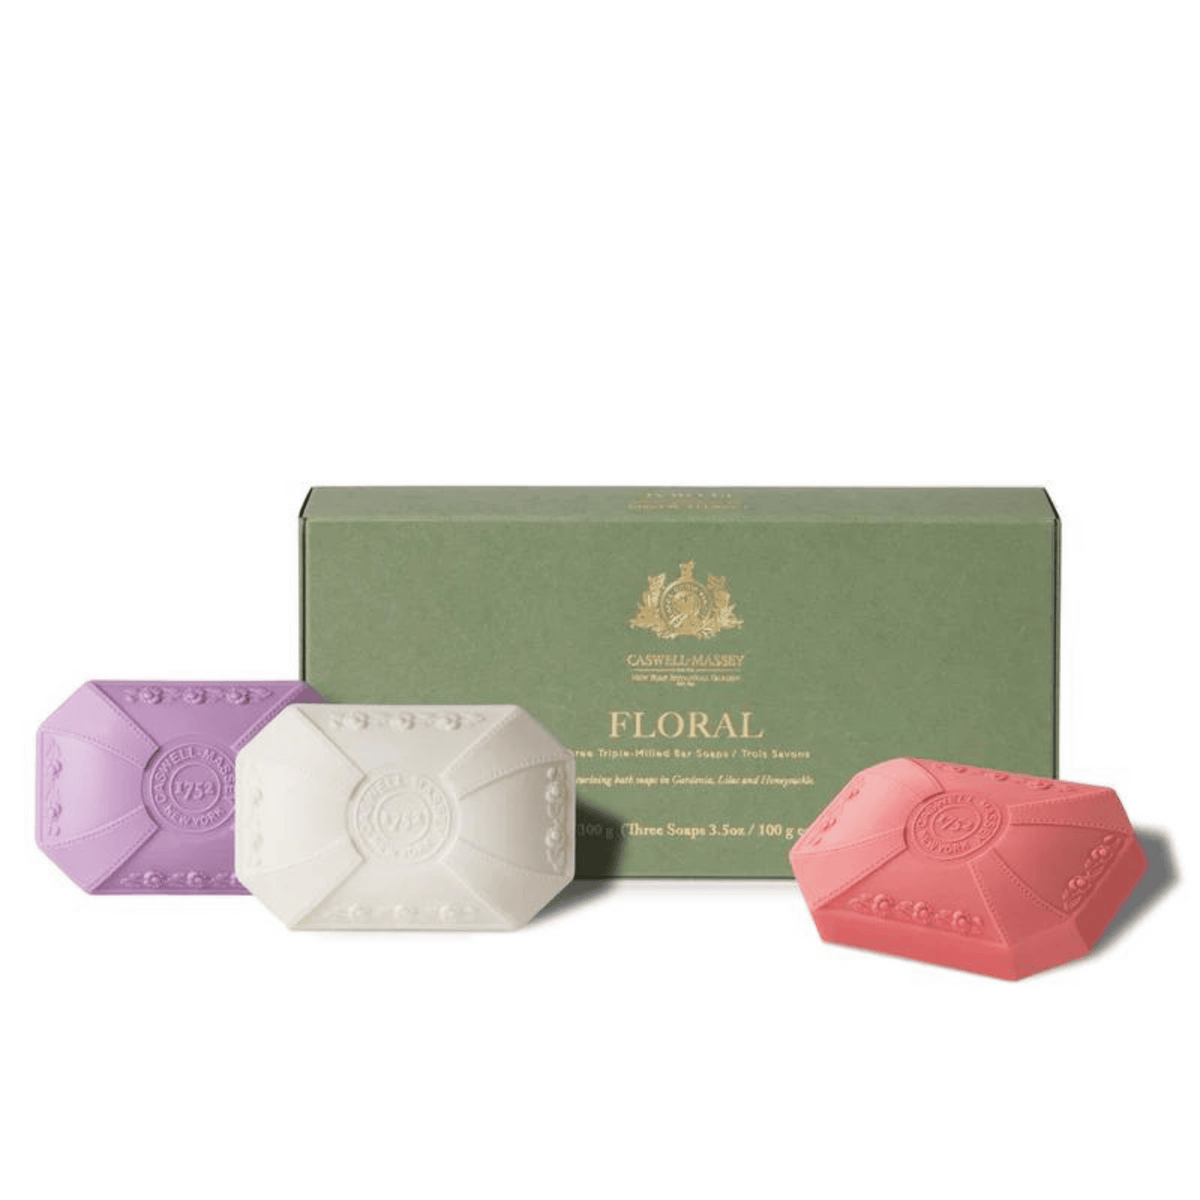 Primary Image of NYBG Floral Soap Set